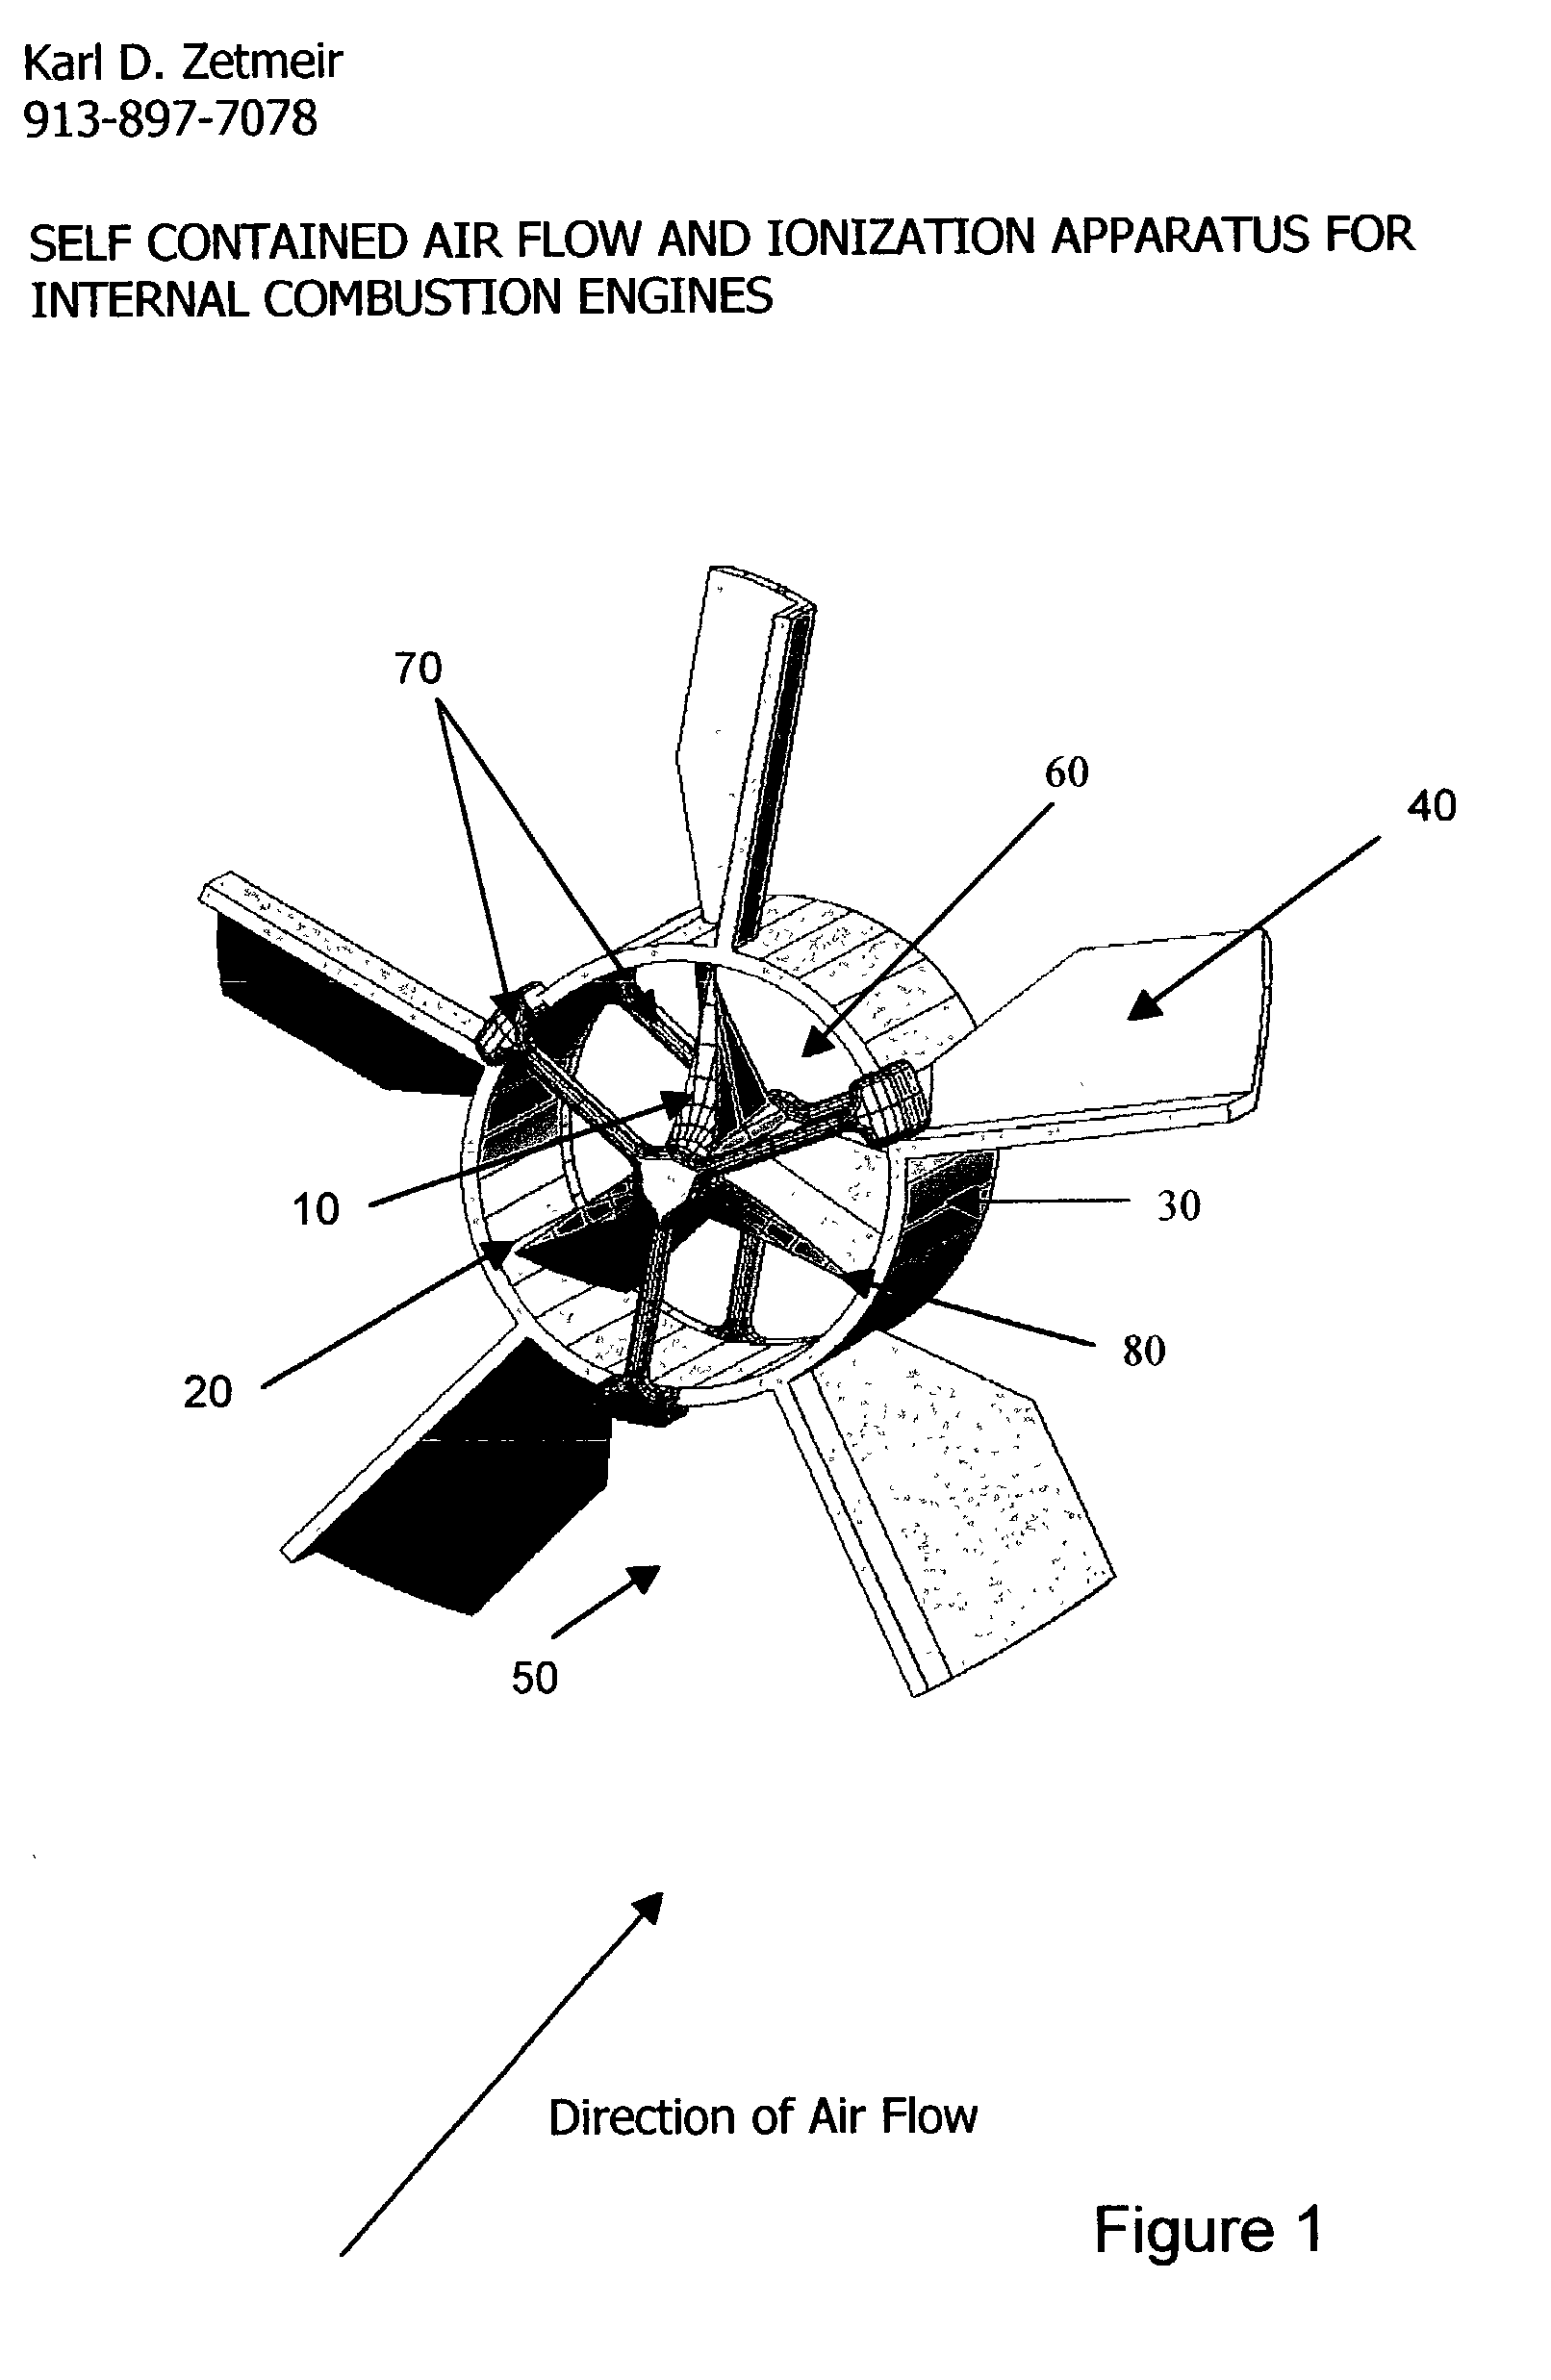 Self contained air flow and ionization method, apparatus and design for internal combustion engines